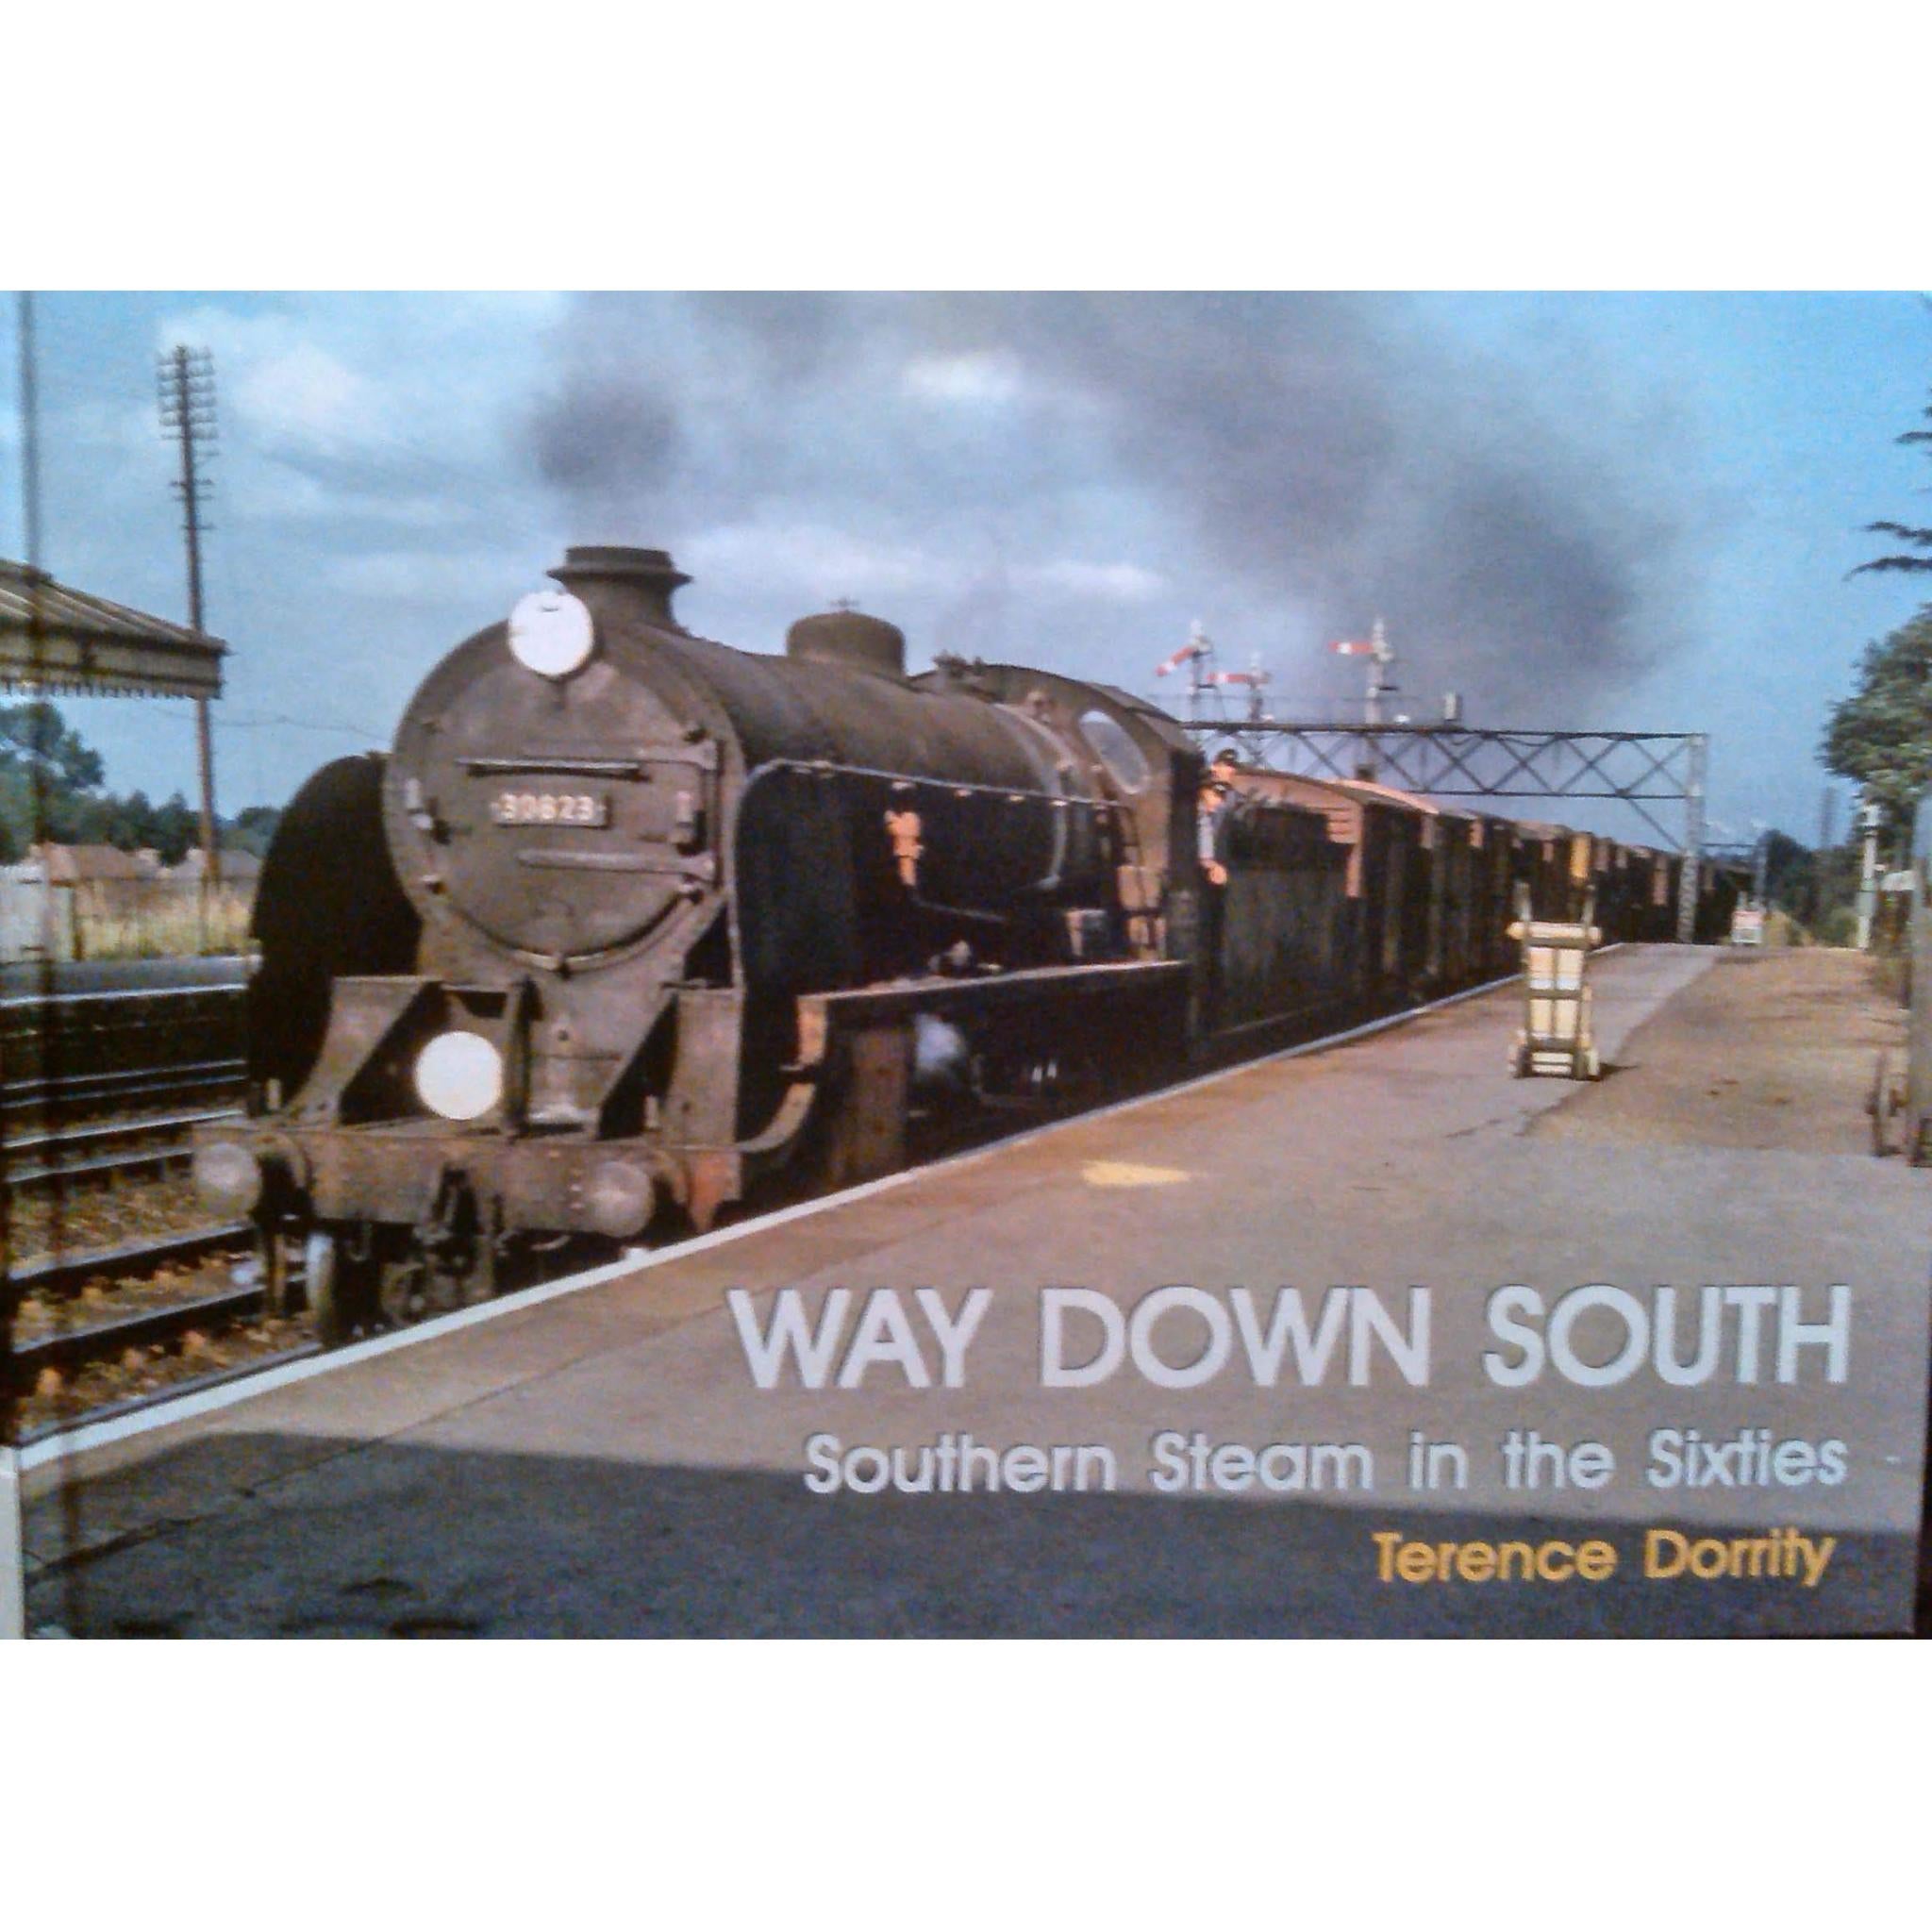 Way Down South - Southern Steam in the Sixties